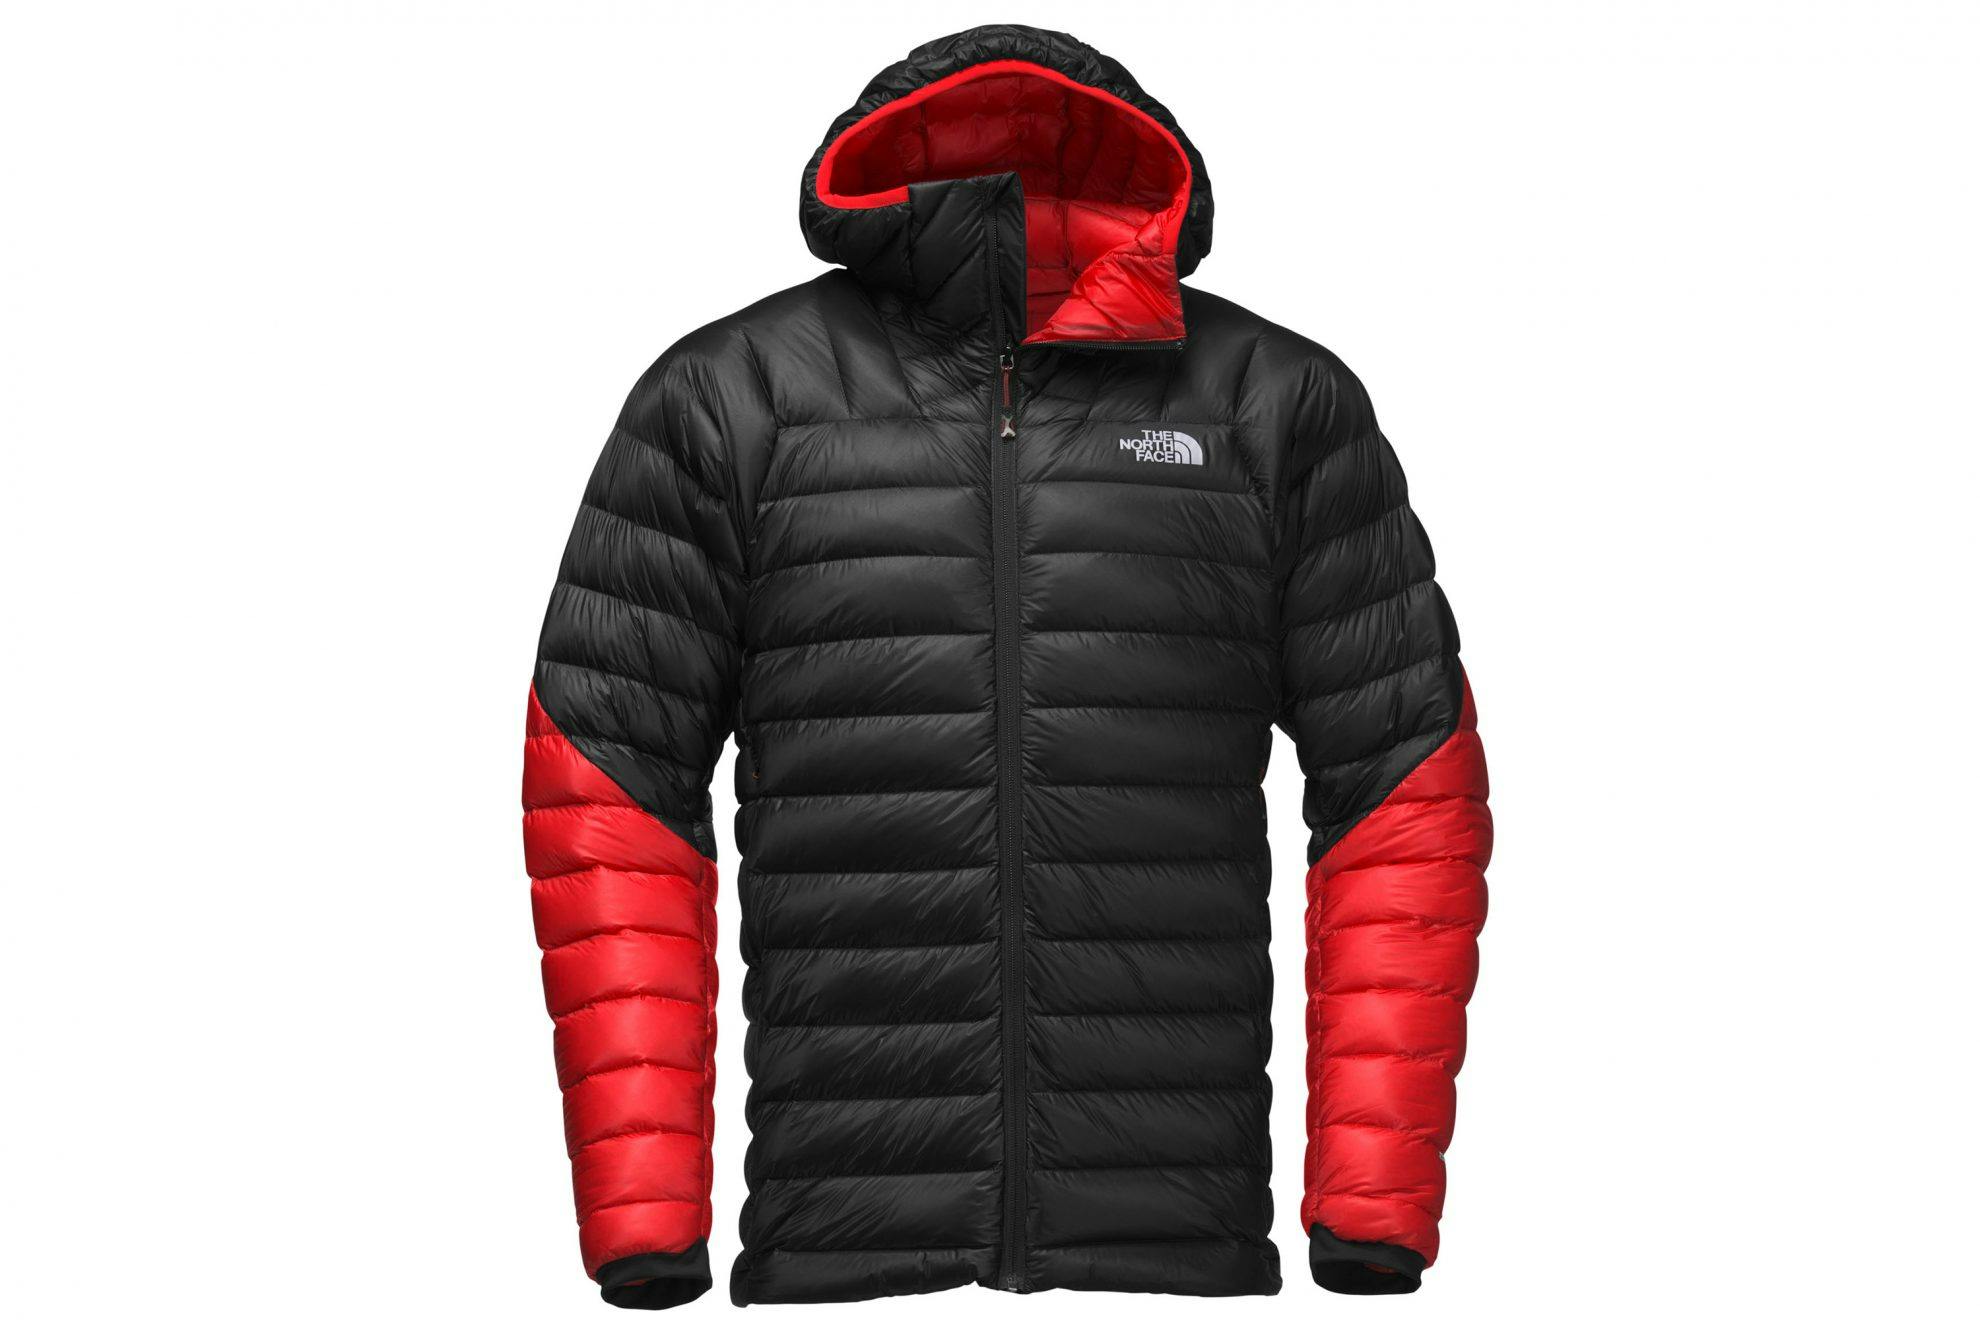 The north face summit series. The North face Summit l3 down Hoodie. The North face Summit Series 700 пуховик. The North face Summit Series куртки. The North face Summit Series жилетка.